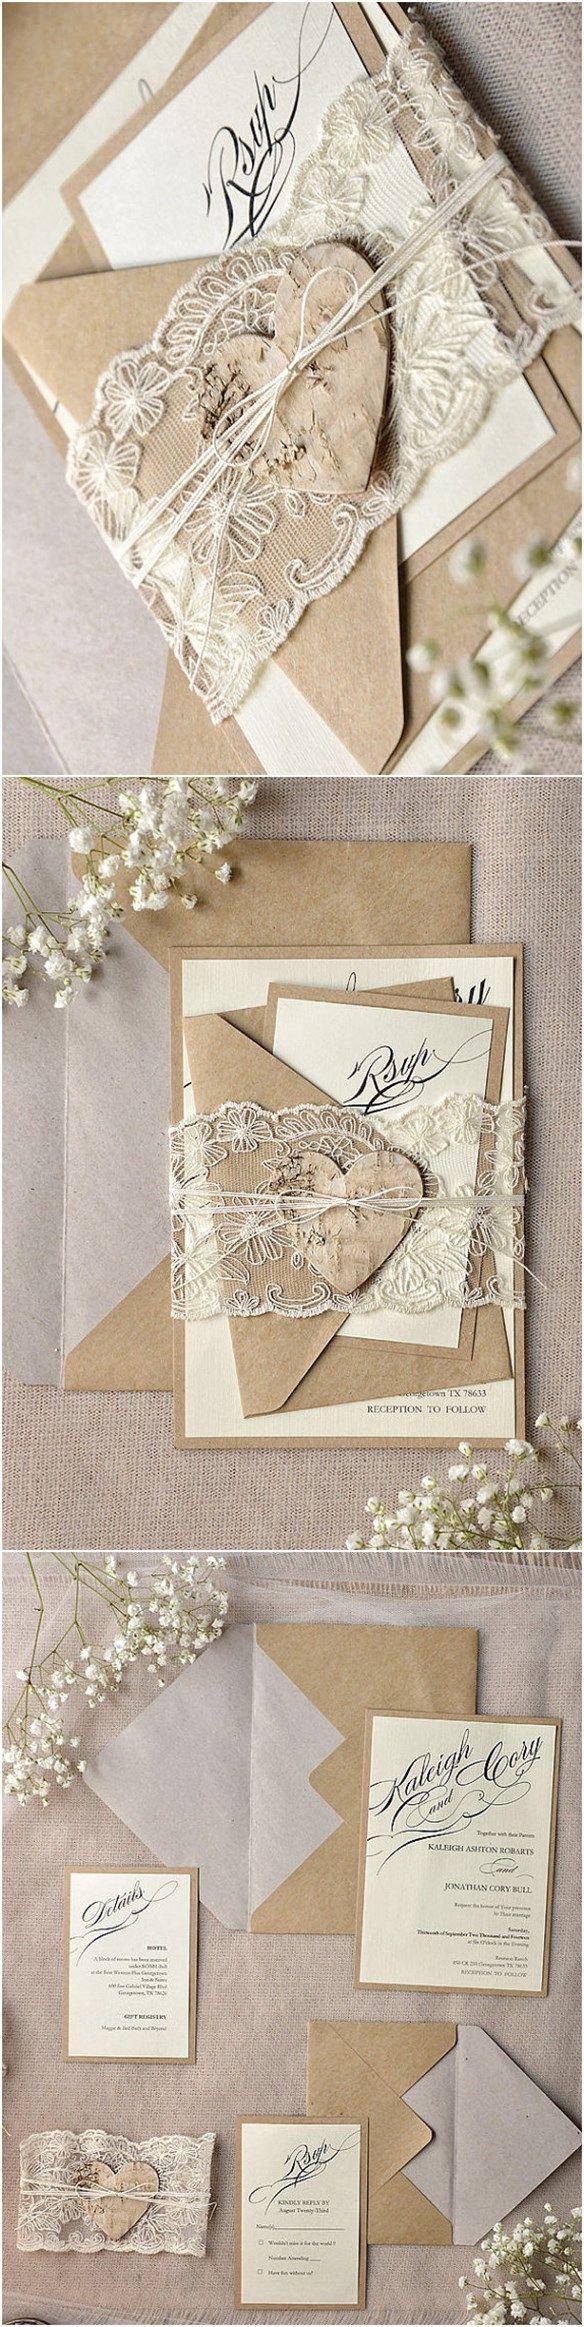 Wedding - Rustic Calligraphy Recycled Lace Wedding Invitation Kits